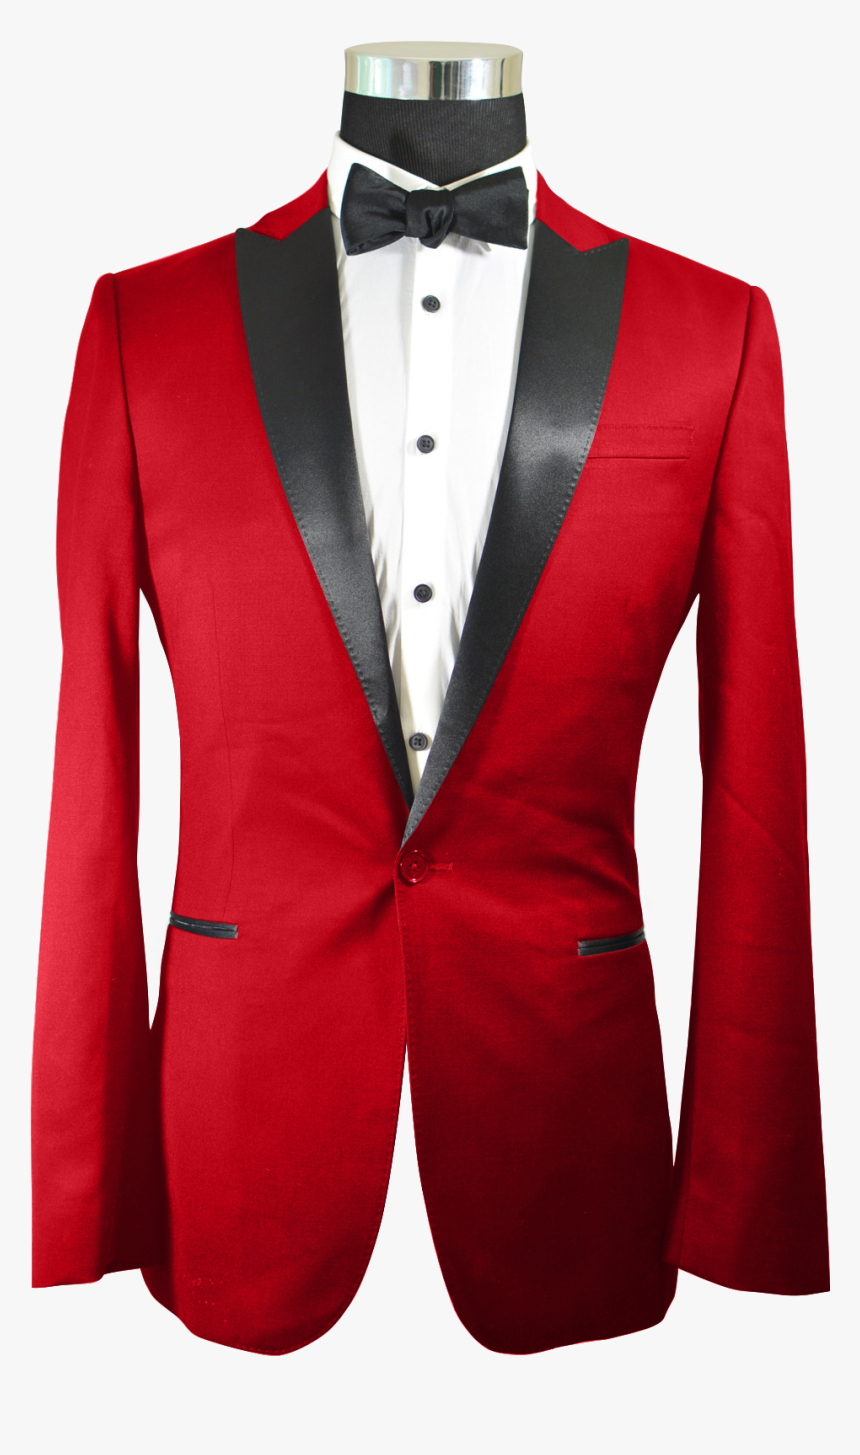 The Regal Red Tuxedo"
 Class= - Red Tuxedo, HD Png Download, Free Download